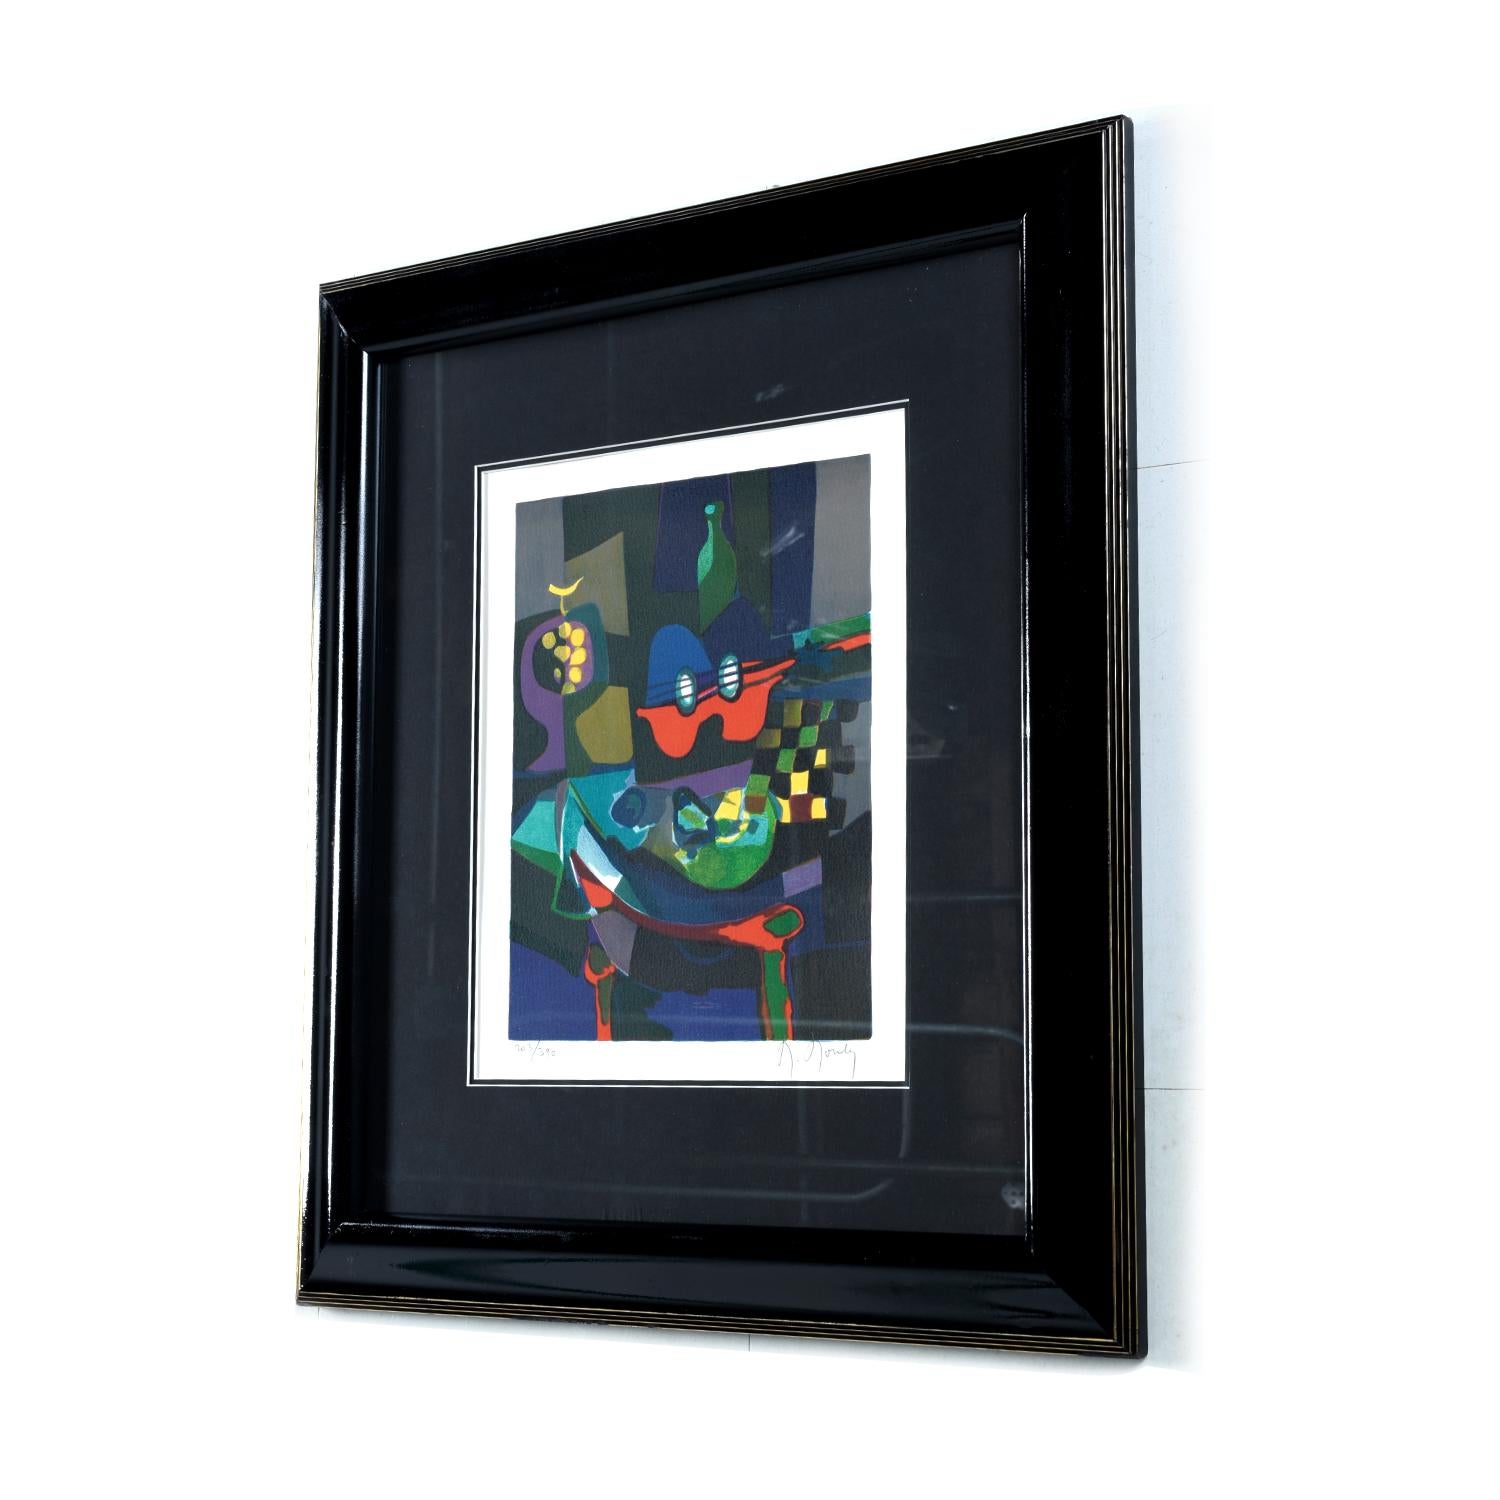 “La Guitare Bicolore” is a cubist limited edition print by prolific French Artist, Marcel Mouly. The image is pencil signed and numbered, 203/390. Marcel Mouly was born in 1918 and studied under celebrated modernist sculptor Jacques Lipchitz. It is